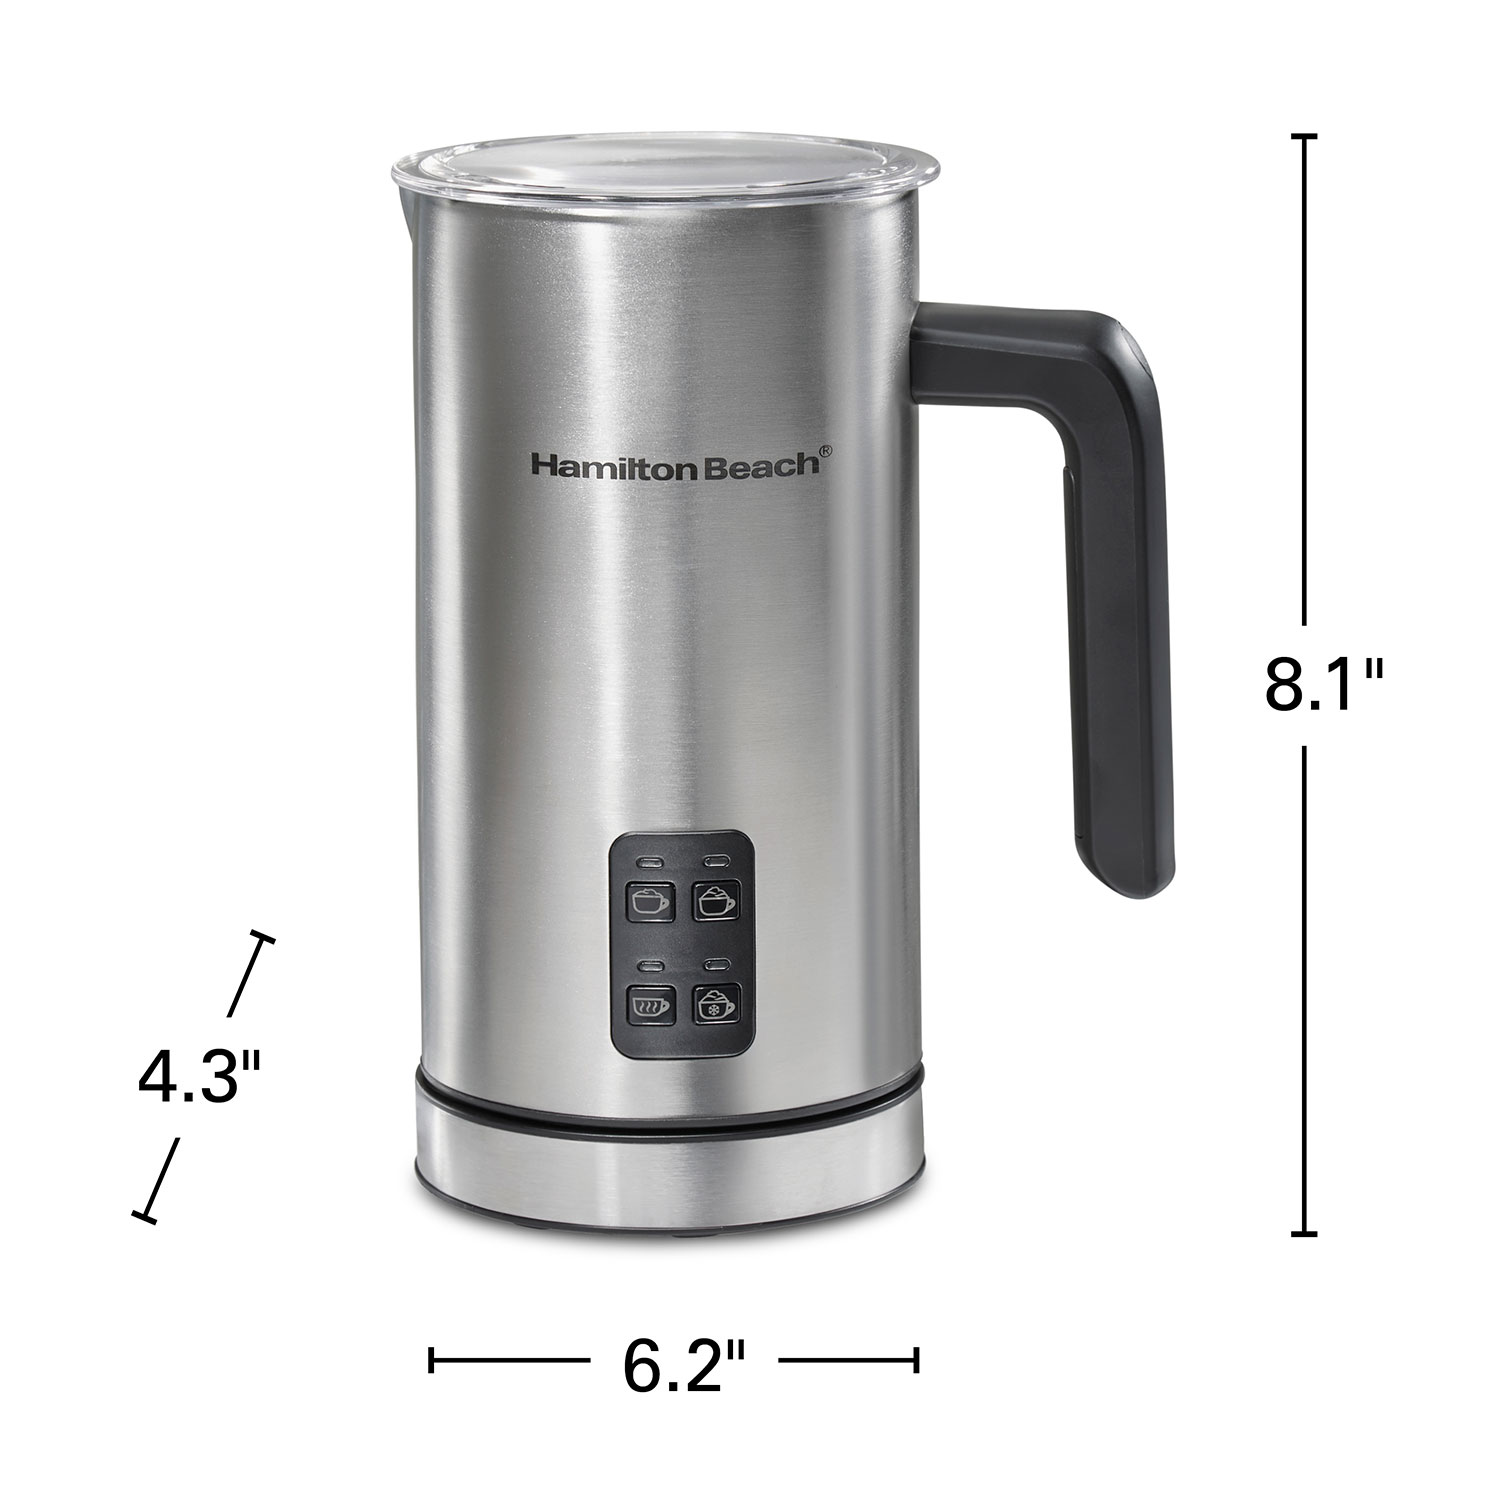 Hamilton Beach Milk Frother and Warmer, Stainless Steel - 43565C